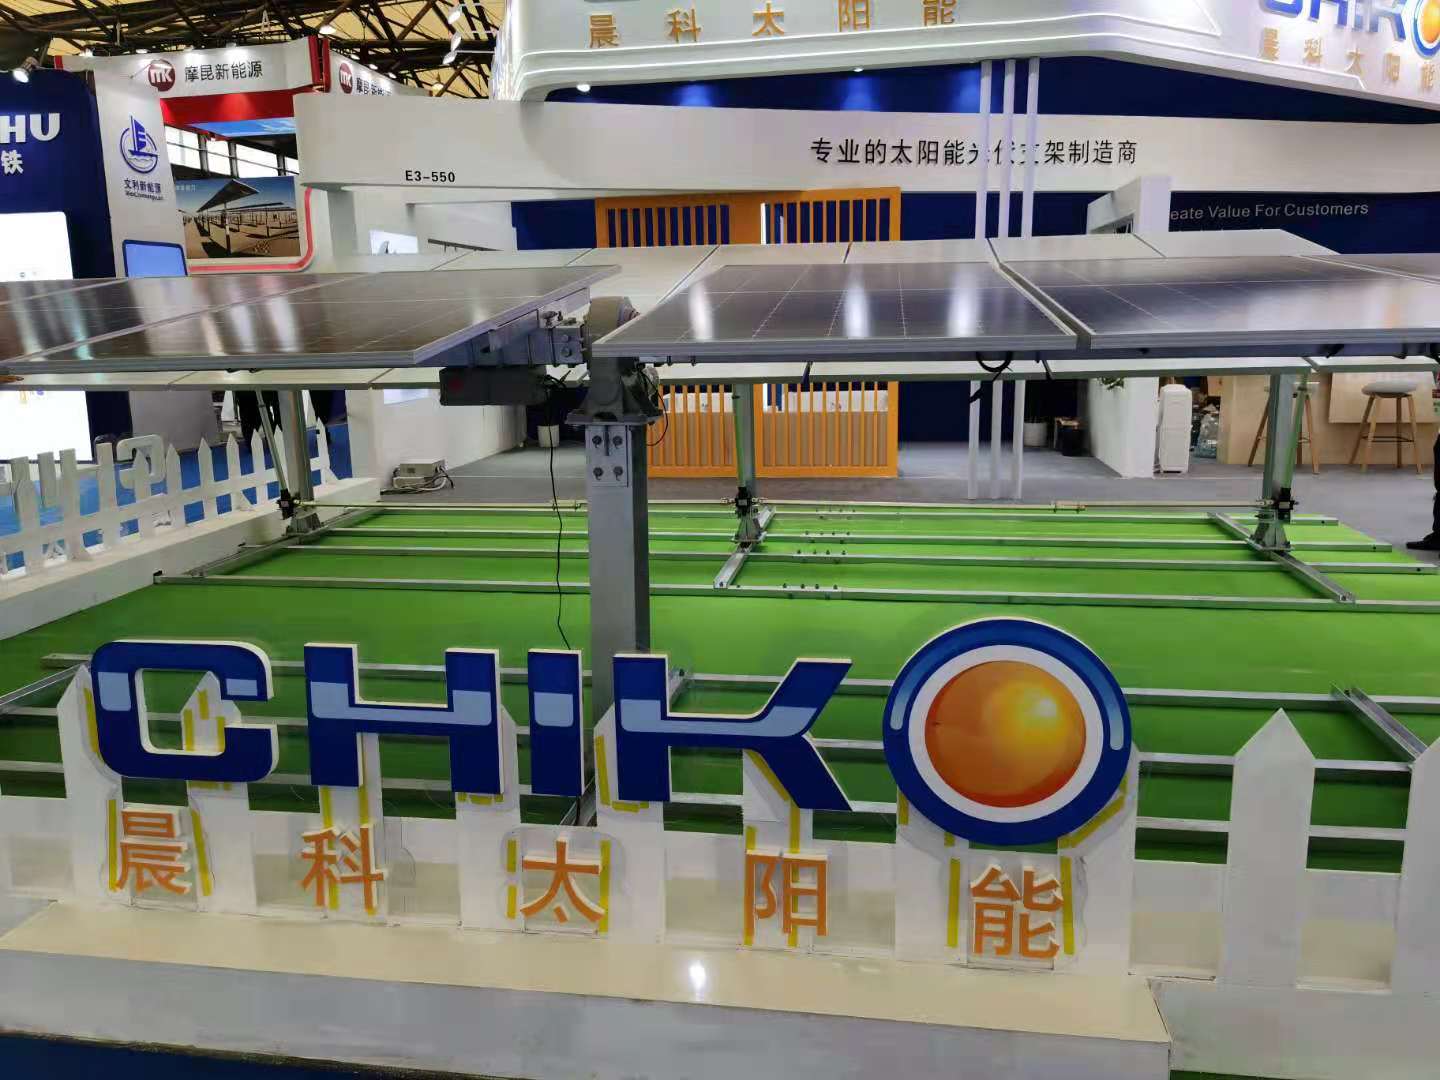 Directly at the exhibition丨CHIKO Solar 2021 International Photovoltaic Exhibition (SNEC) on-site grand occasion